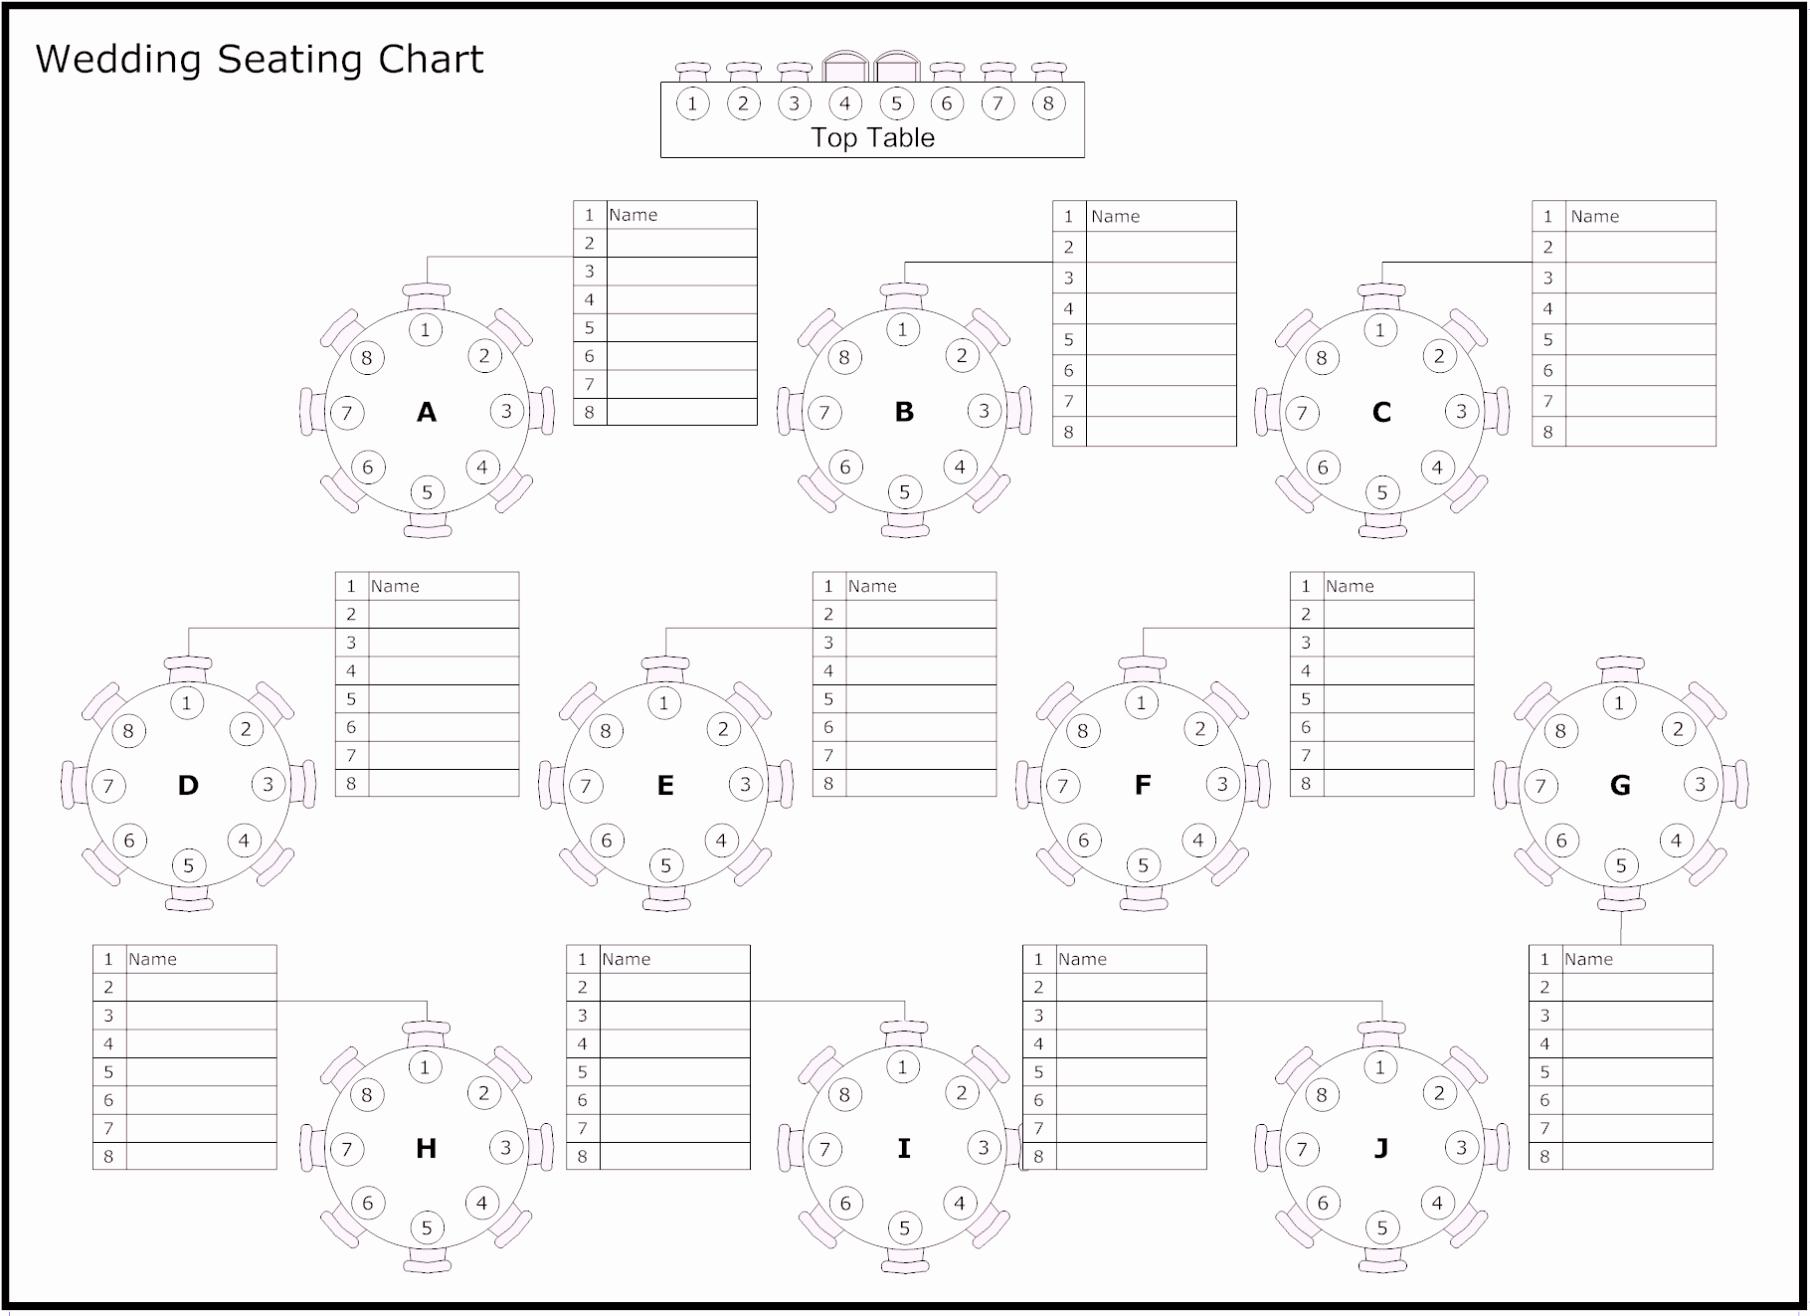 Seating Chart Wedding Template Free New Free Table Of Reception &amp; Wedding Seating Chart Template